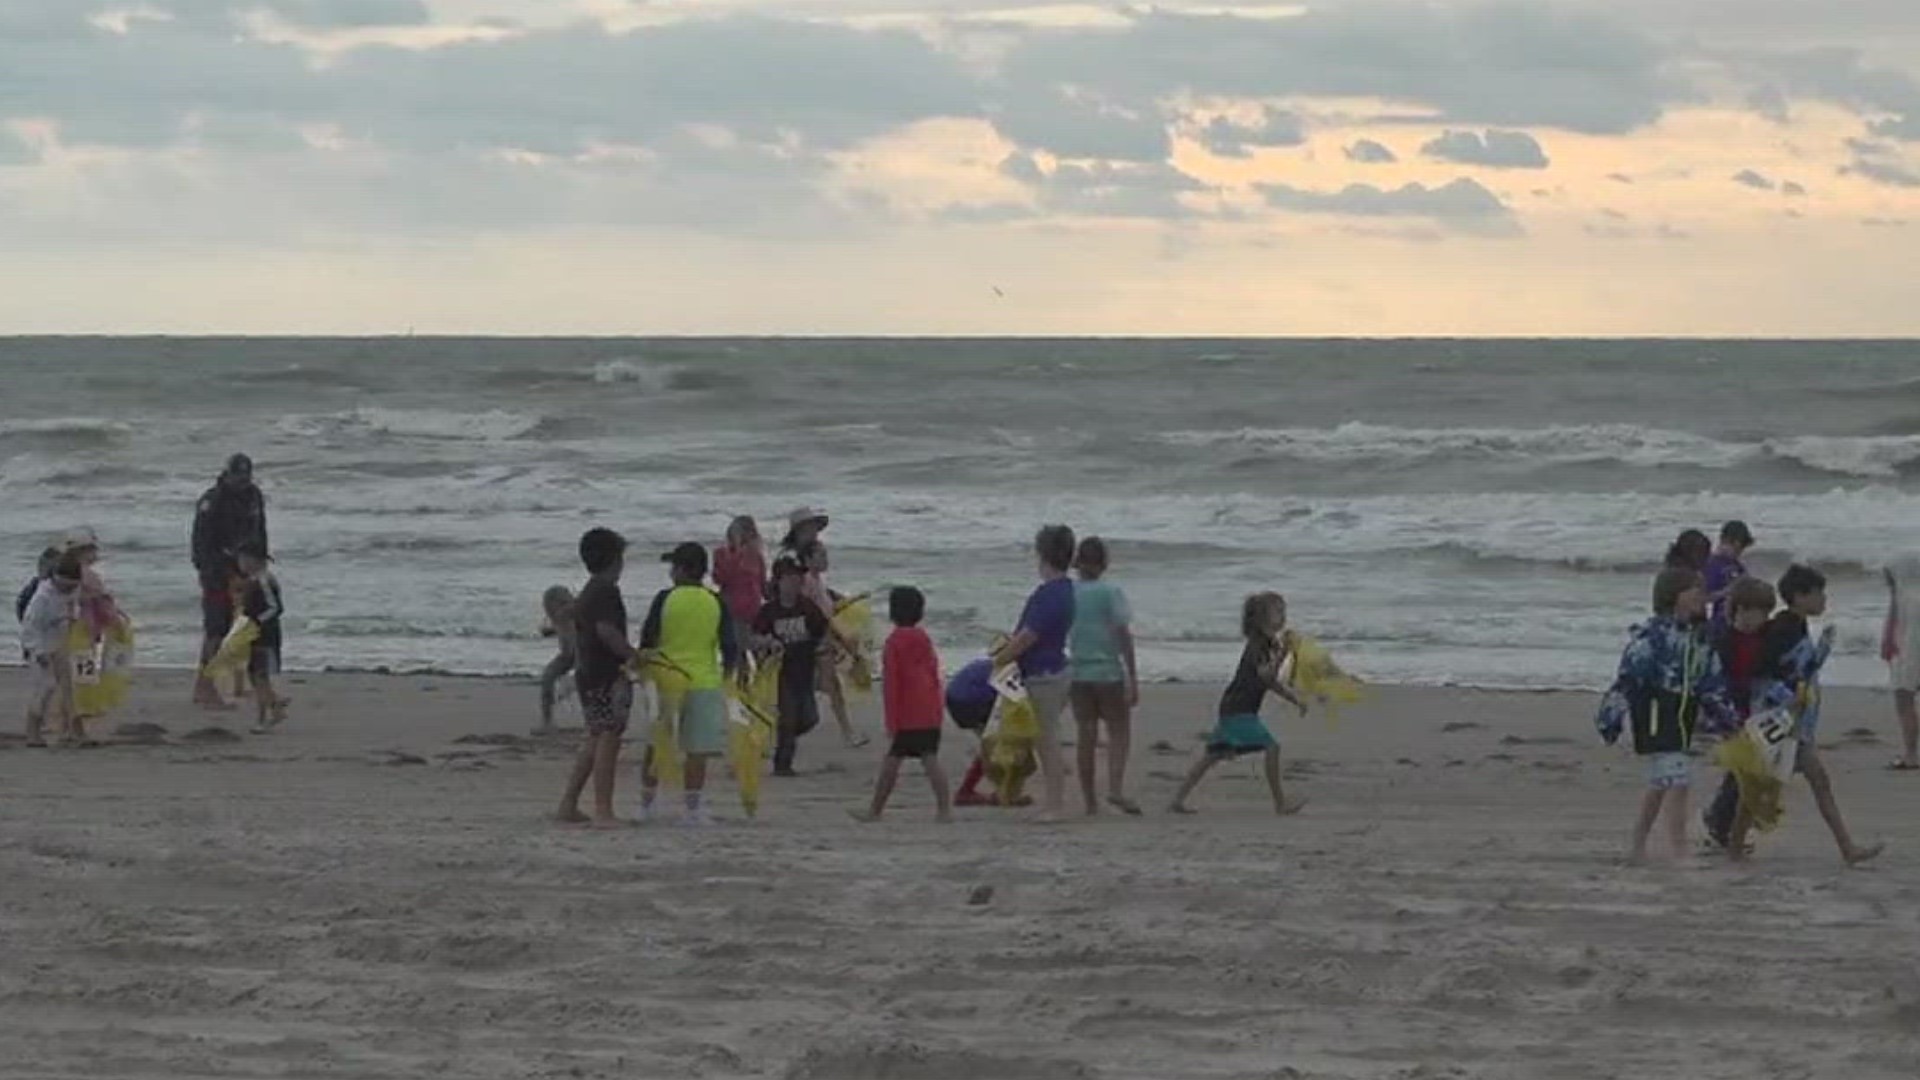 The students learned the importance of taking care of natural spaces like the beach that residents love to enjoy.